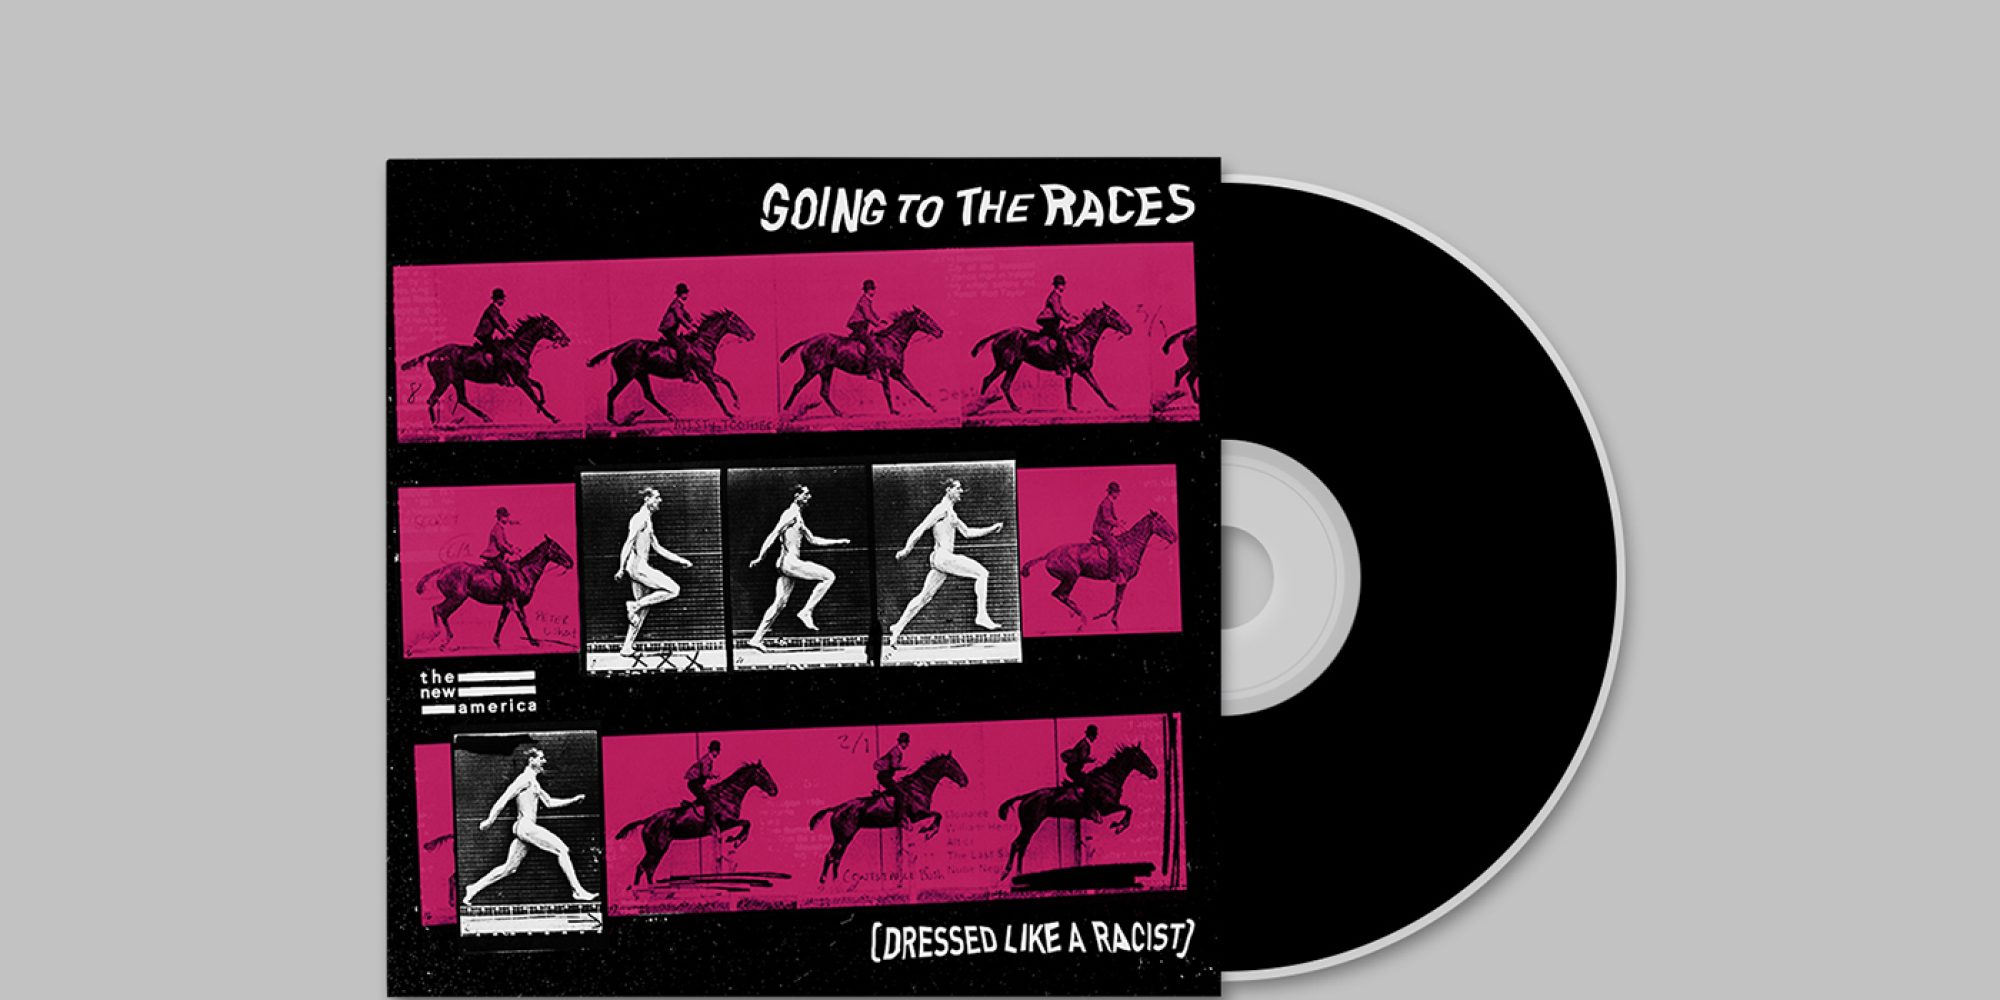 EP with disc sliding from cover. The cover artwork is pink and black with film strips of horse running intercut with a naked man running.